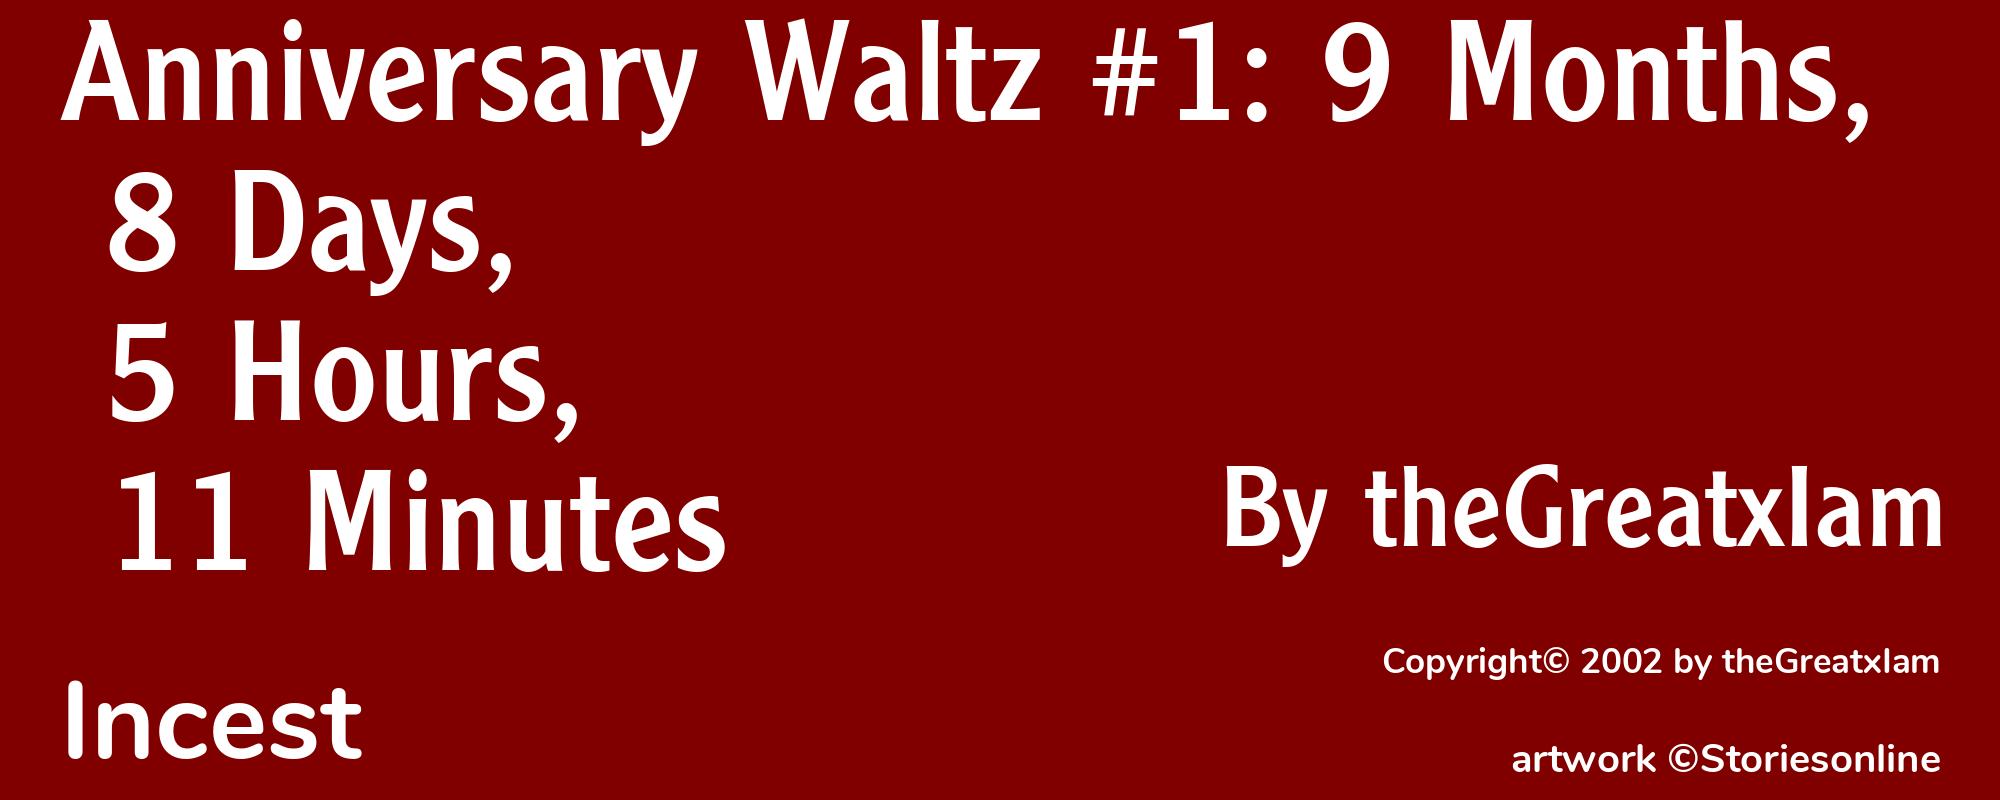 Anniversary Waltz #1: 9 Months, 8 Days, 5 Hours, 11 Minutes - Cover